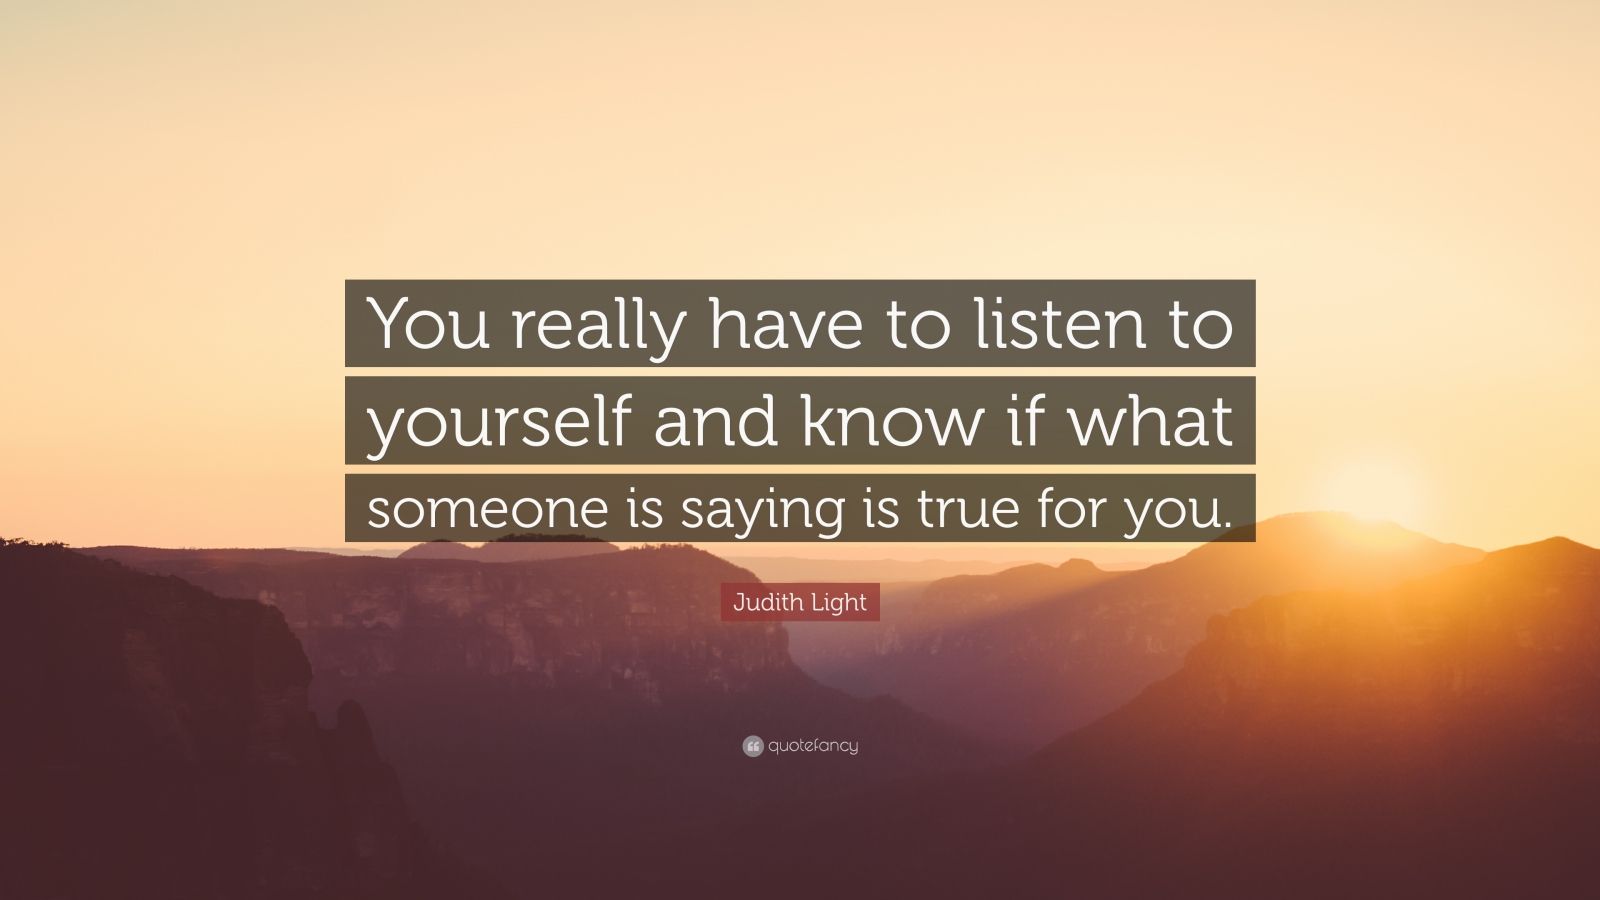 Judith Light Quote: “You really have to listen to yourself and know if ...